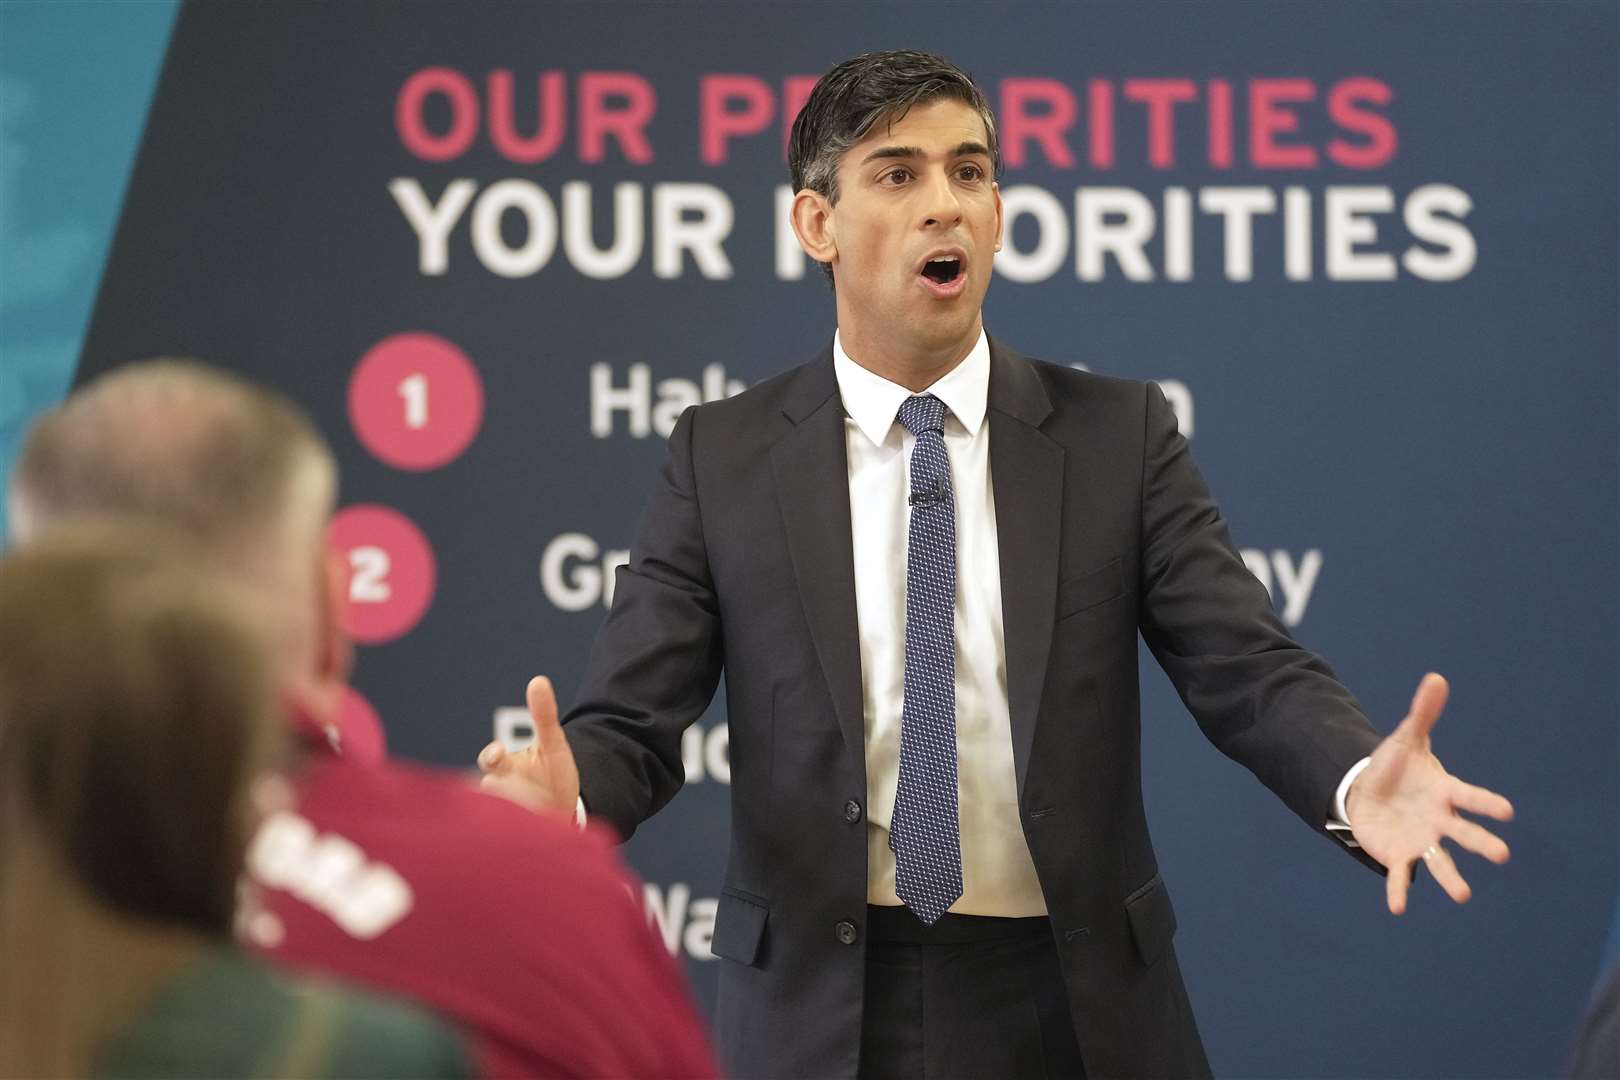 Prime Minister Rishi Sunak takes part in a Q&A session during a Connect event in Chelmsford, Essex (Kin Cheung/PA)